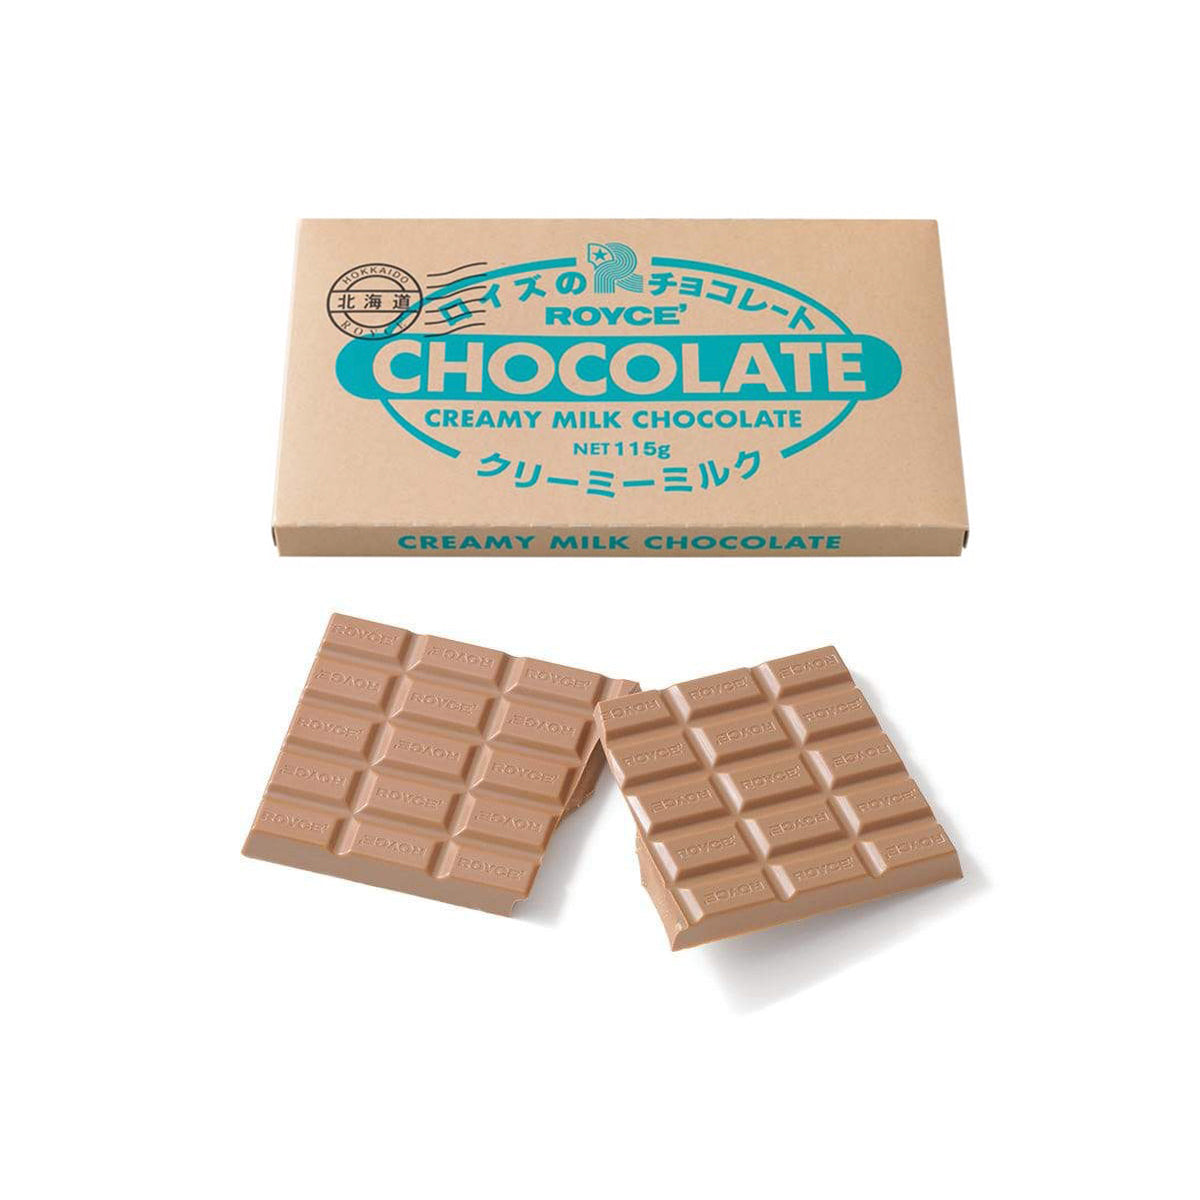 ROYCE' Chocolate - Chocolate Bar "Creamy Milk" - Image shows a chocolate carton. Text in black says Hokkaido ROYCE'. Text in blue says ROYCE' Chocolate Creamy Milk Chocolate Net 115g. Text on bottom part says Creamy Milk Chocolate. Image below shows brown chocolate bars and the word "ROYCE'" engraved.